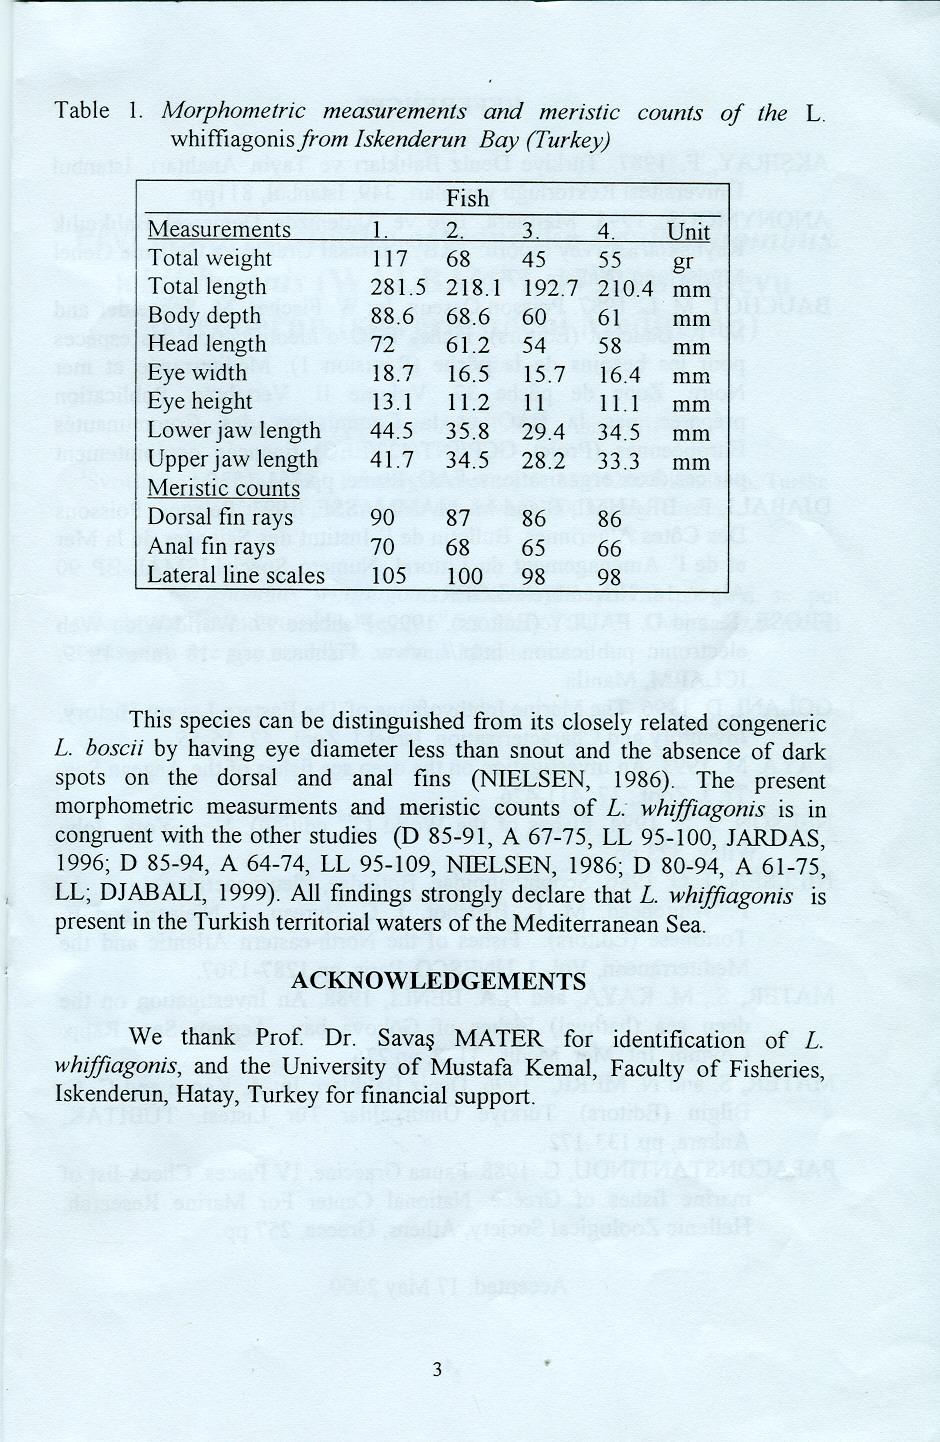 Table 1. Morphometric measurements and meristic counts of the L. whiffiagonisfrom skenderun Bay (Turkey) Fish Measurements 1. 2. 3. 4. Unit Total weight 117 68 45 55 gr 281.5 218.1 192.7 210.